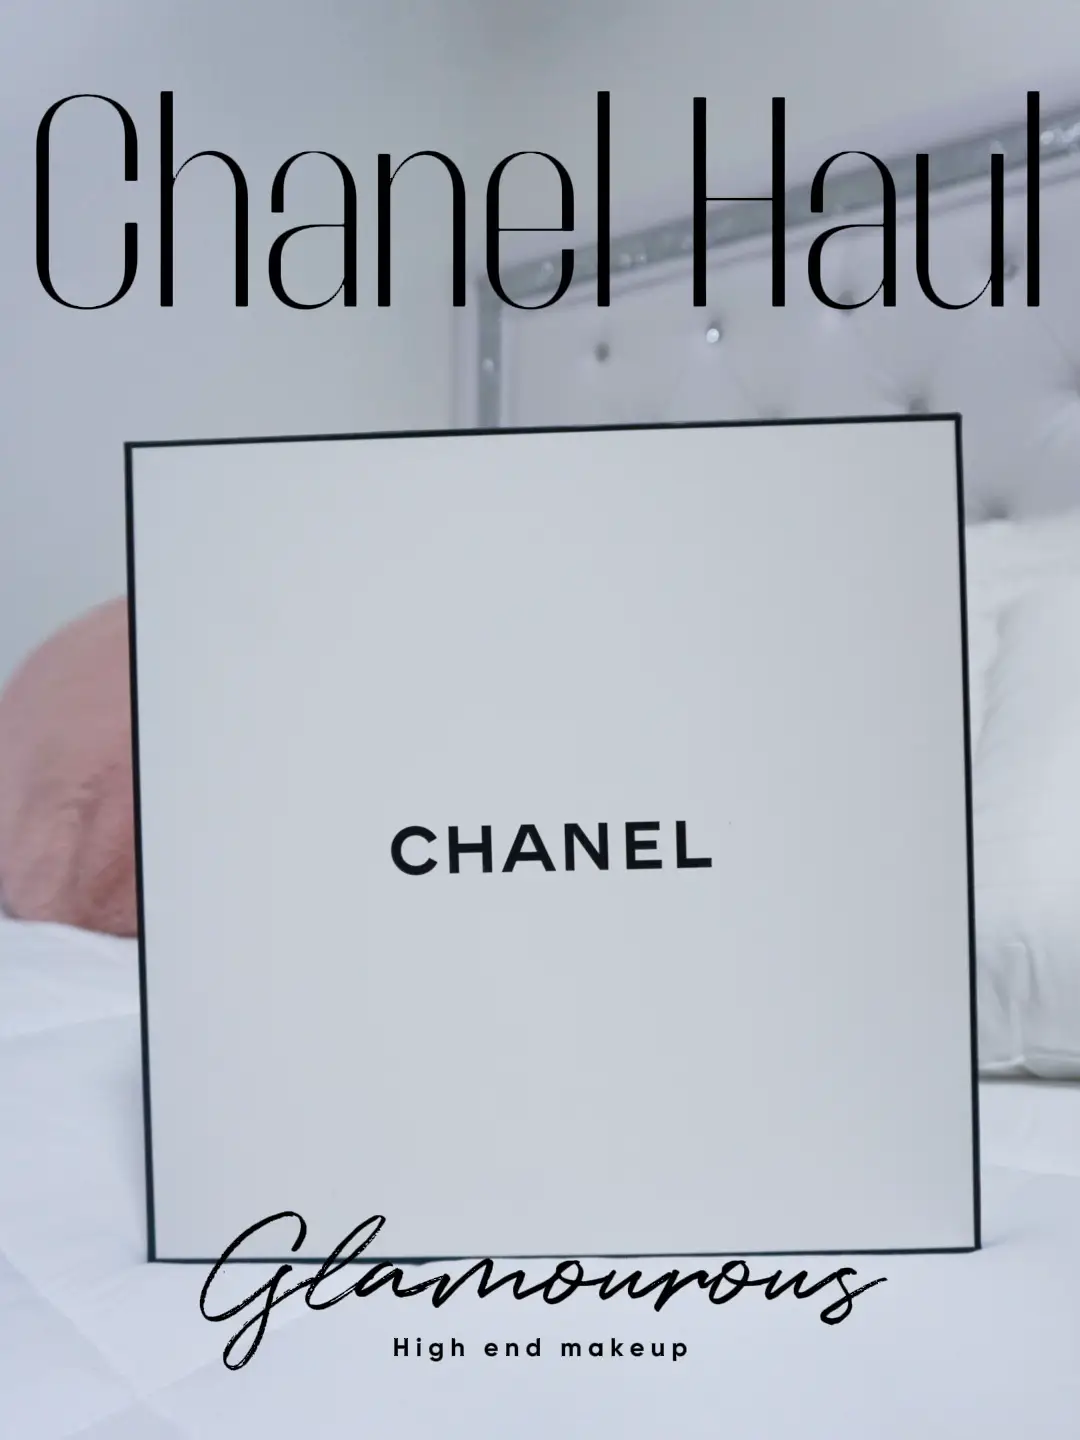 Chanel Beauty Unboxing, Gallery posted by Meganelizabeth